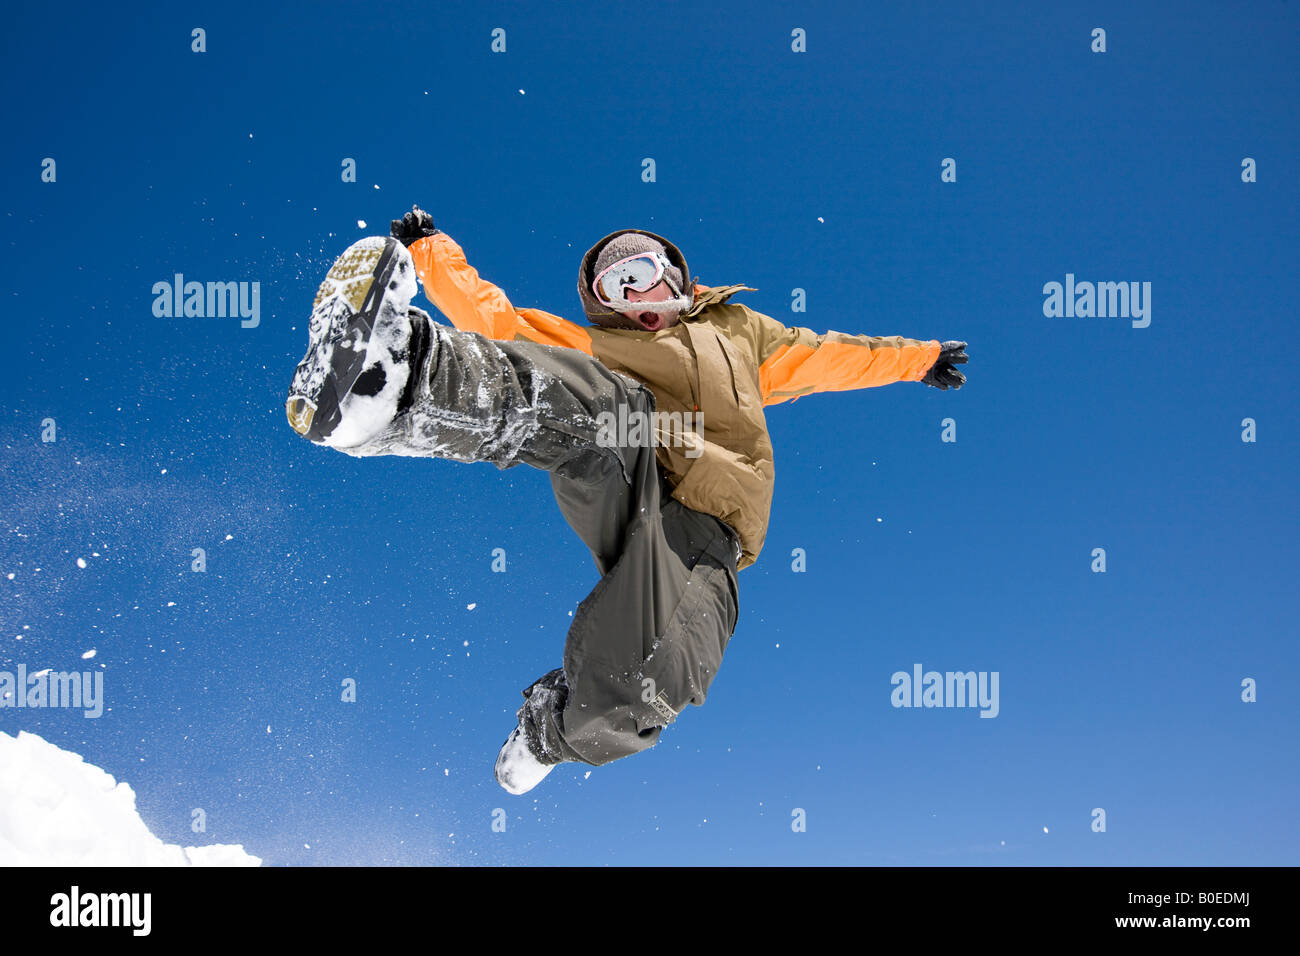 Man leaps from snowy jump. Stock Photo